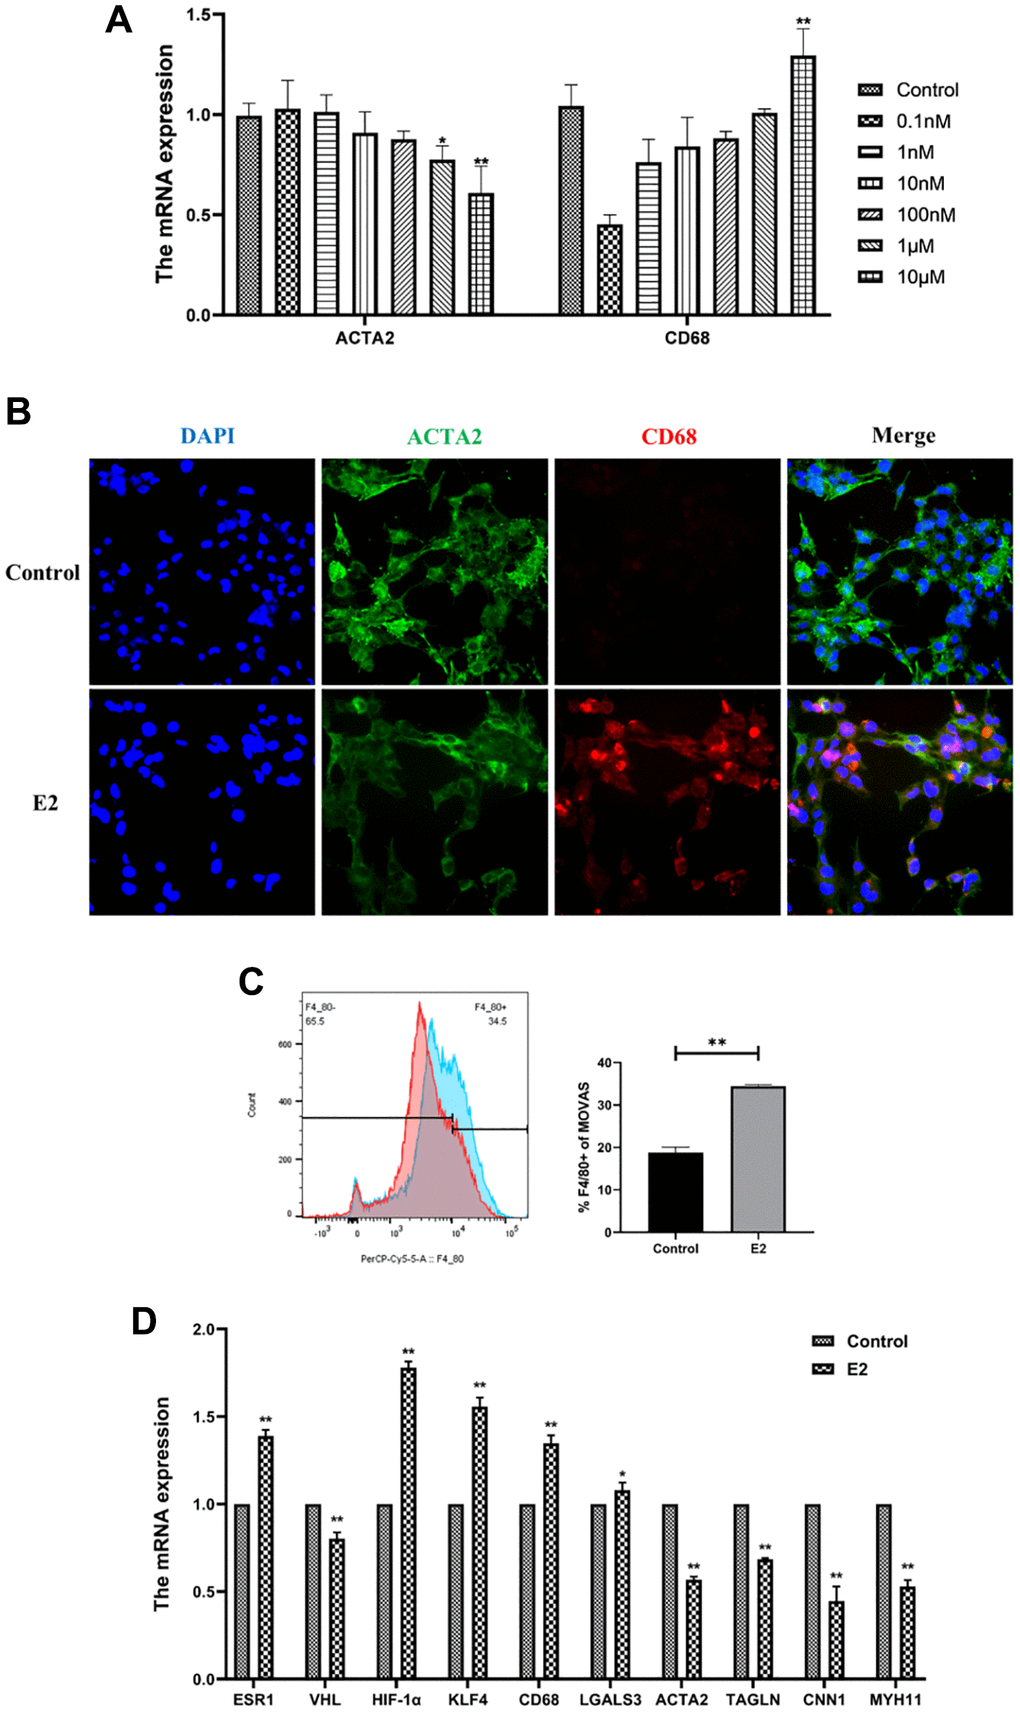 E2 induces transformation of MOVAS cells into a macrophage-like phenotype. (A) MOVAS cells were treated with E2 (0.1 nM, 1 nM, 10 nM, 100 nM, 1 μM, and 10 μM) for 4 days. The contractile phenotype marker, ACTA2, and the macrophage marker, CD68, were detected by qRT-PCR. (B–D) MOVAS cells were treated with 10 μM E2 for 4 days (n = 4). (B) ACTA2 and CD68 levels in MOVAS cells were detected by immunofluorescence analysis. (C) F4/80 antibody expression on the surface of MOVAS cells was detected by FCM analysis (n = 3). (D) Contraction phenotype-related markers (ACTA2, TAGLN, CNN1, and MYH11) and macrophage-like phenotype-related markers (CD68 and LGALS3) in MOVAS cells were evaluated by qRT-PCR (n = 4). *P **P 